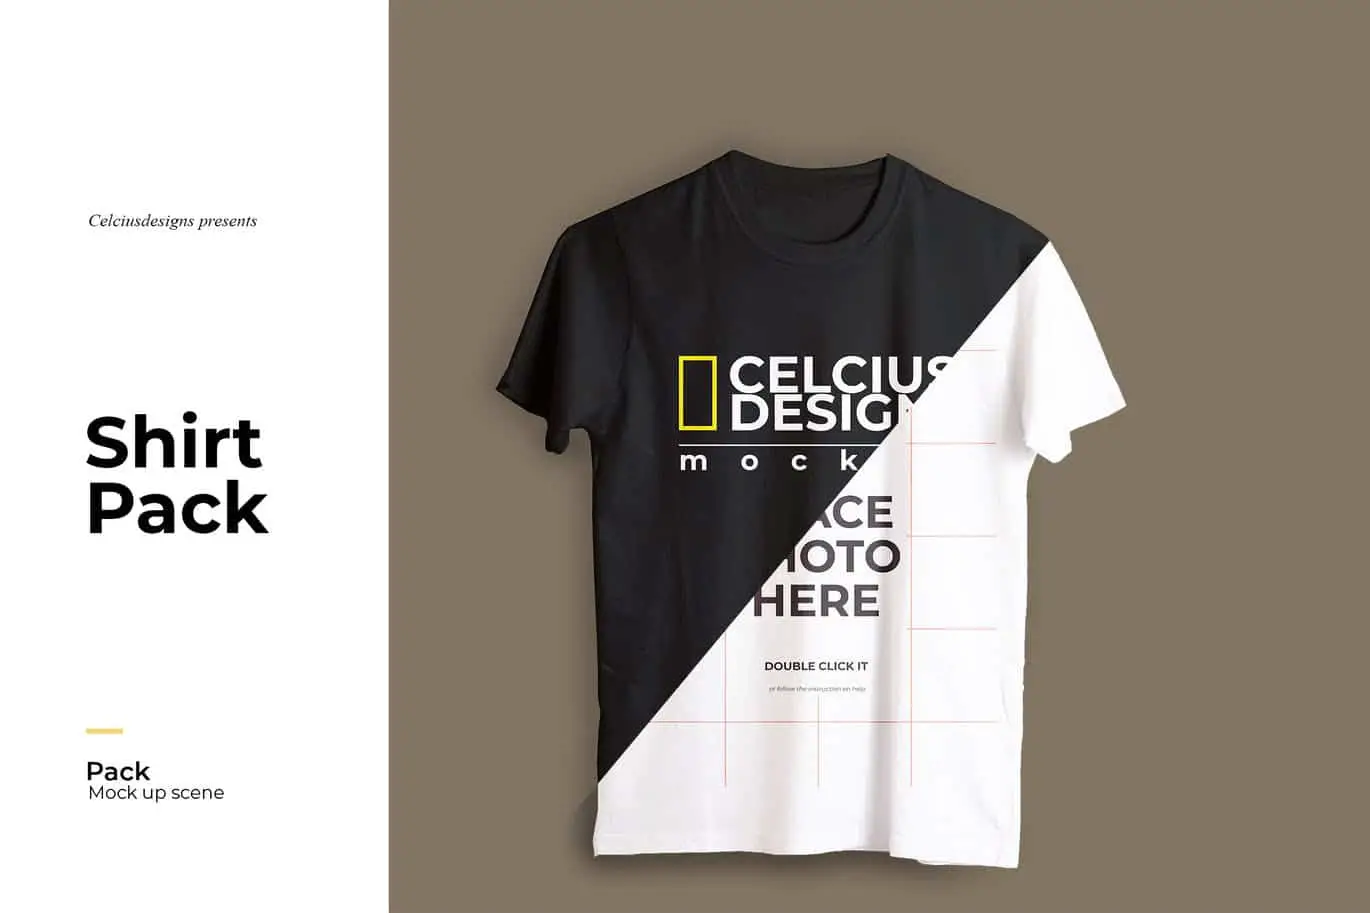 Two-Tone T-shirt Mockup by CelciusDesigns